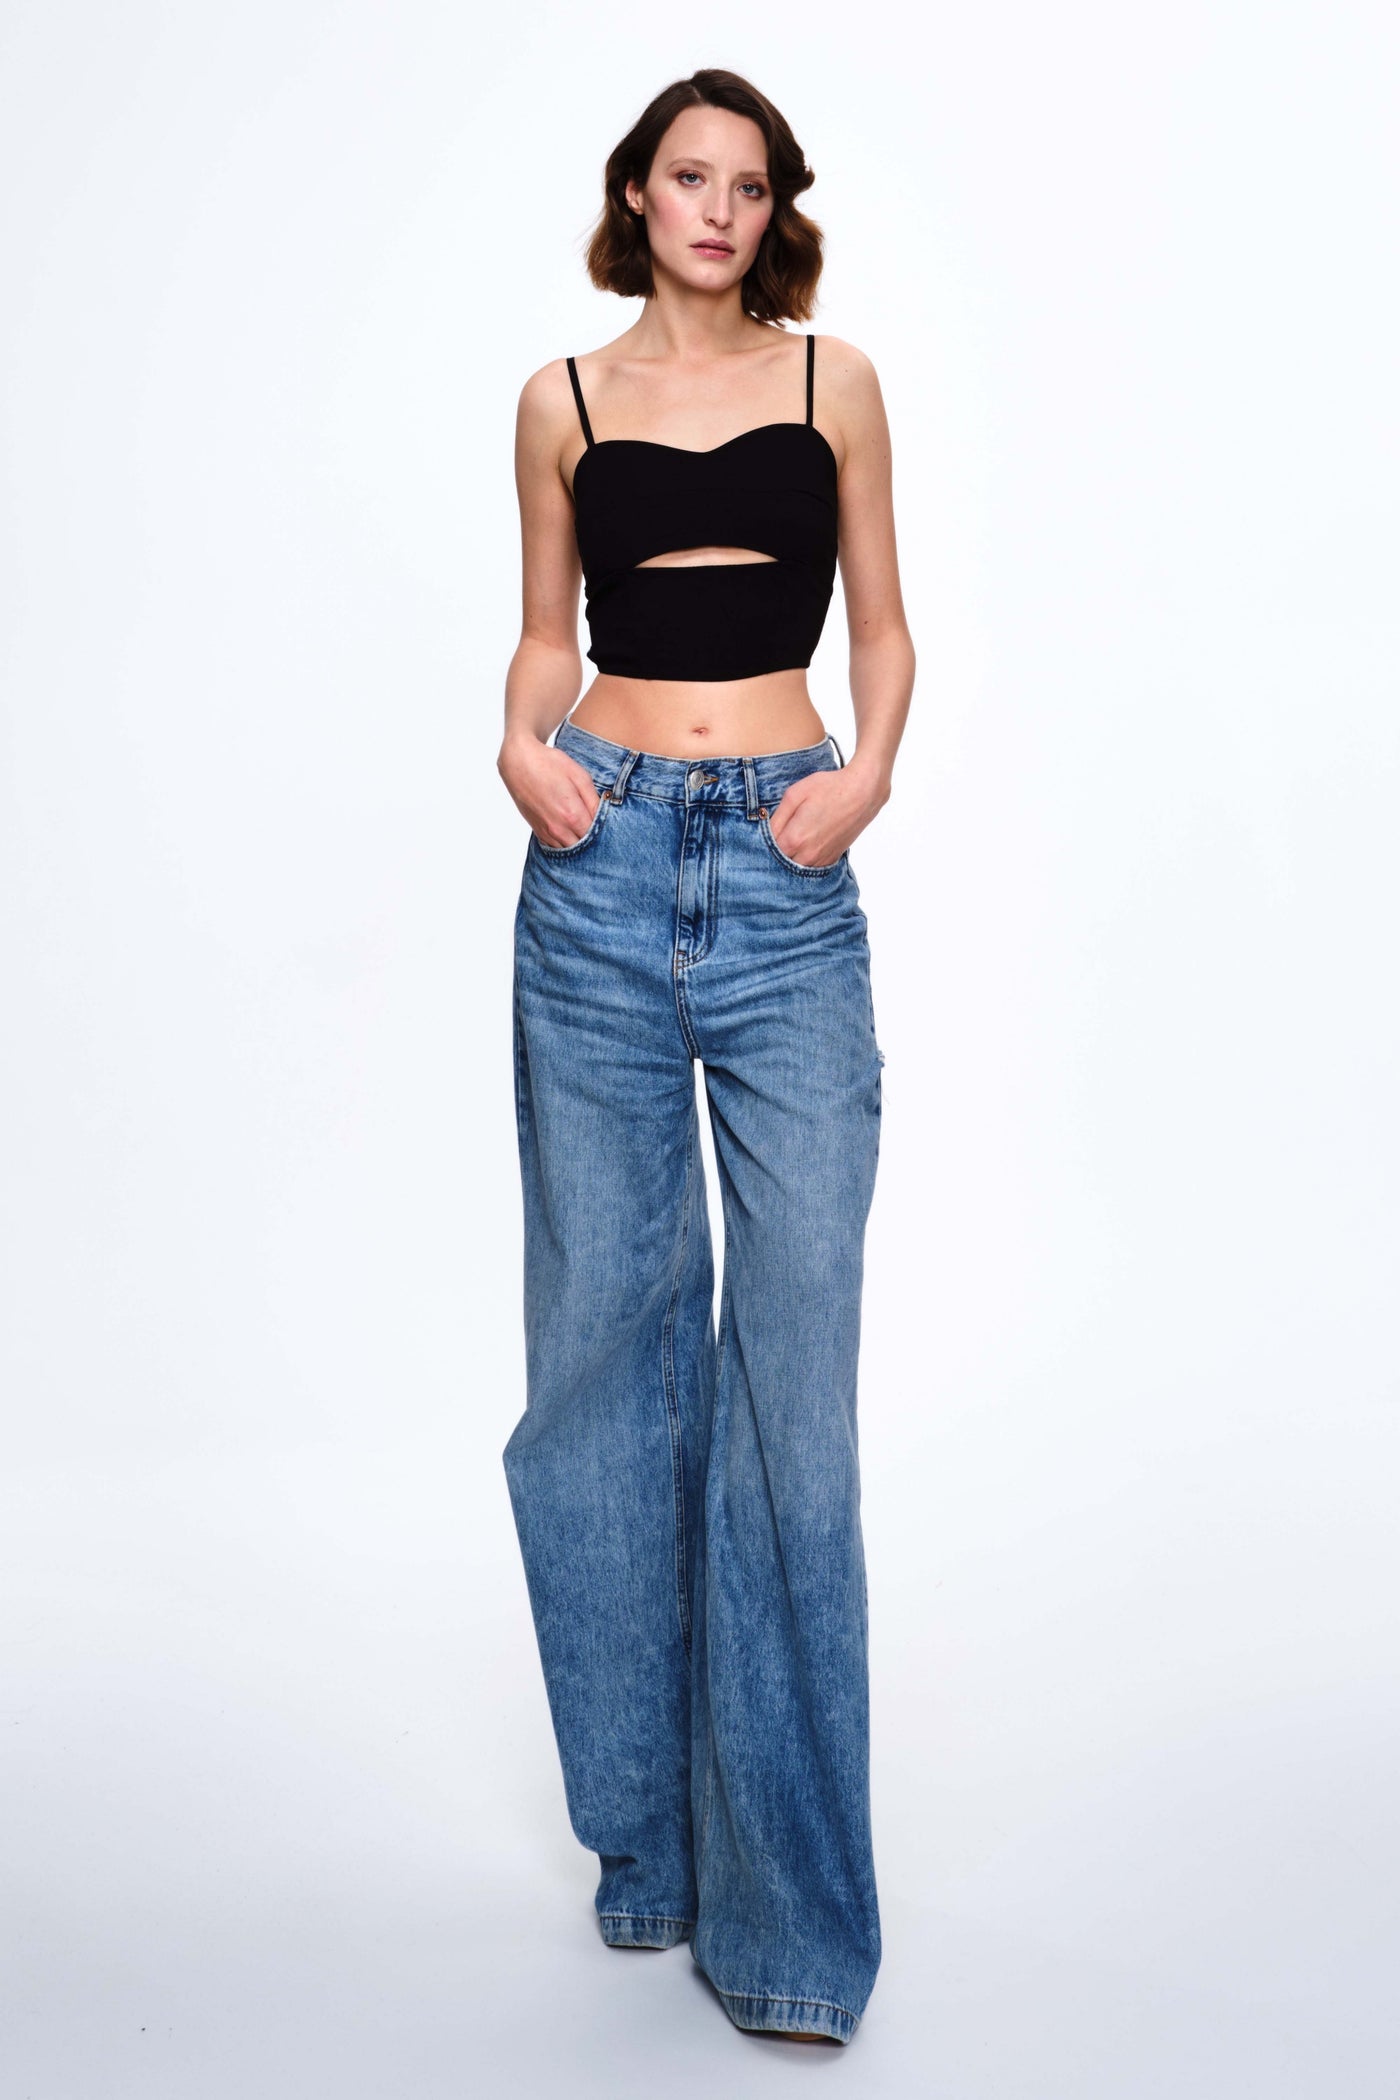 TOP CROPPED NEGRO